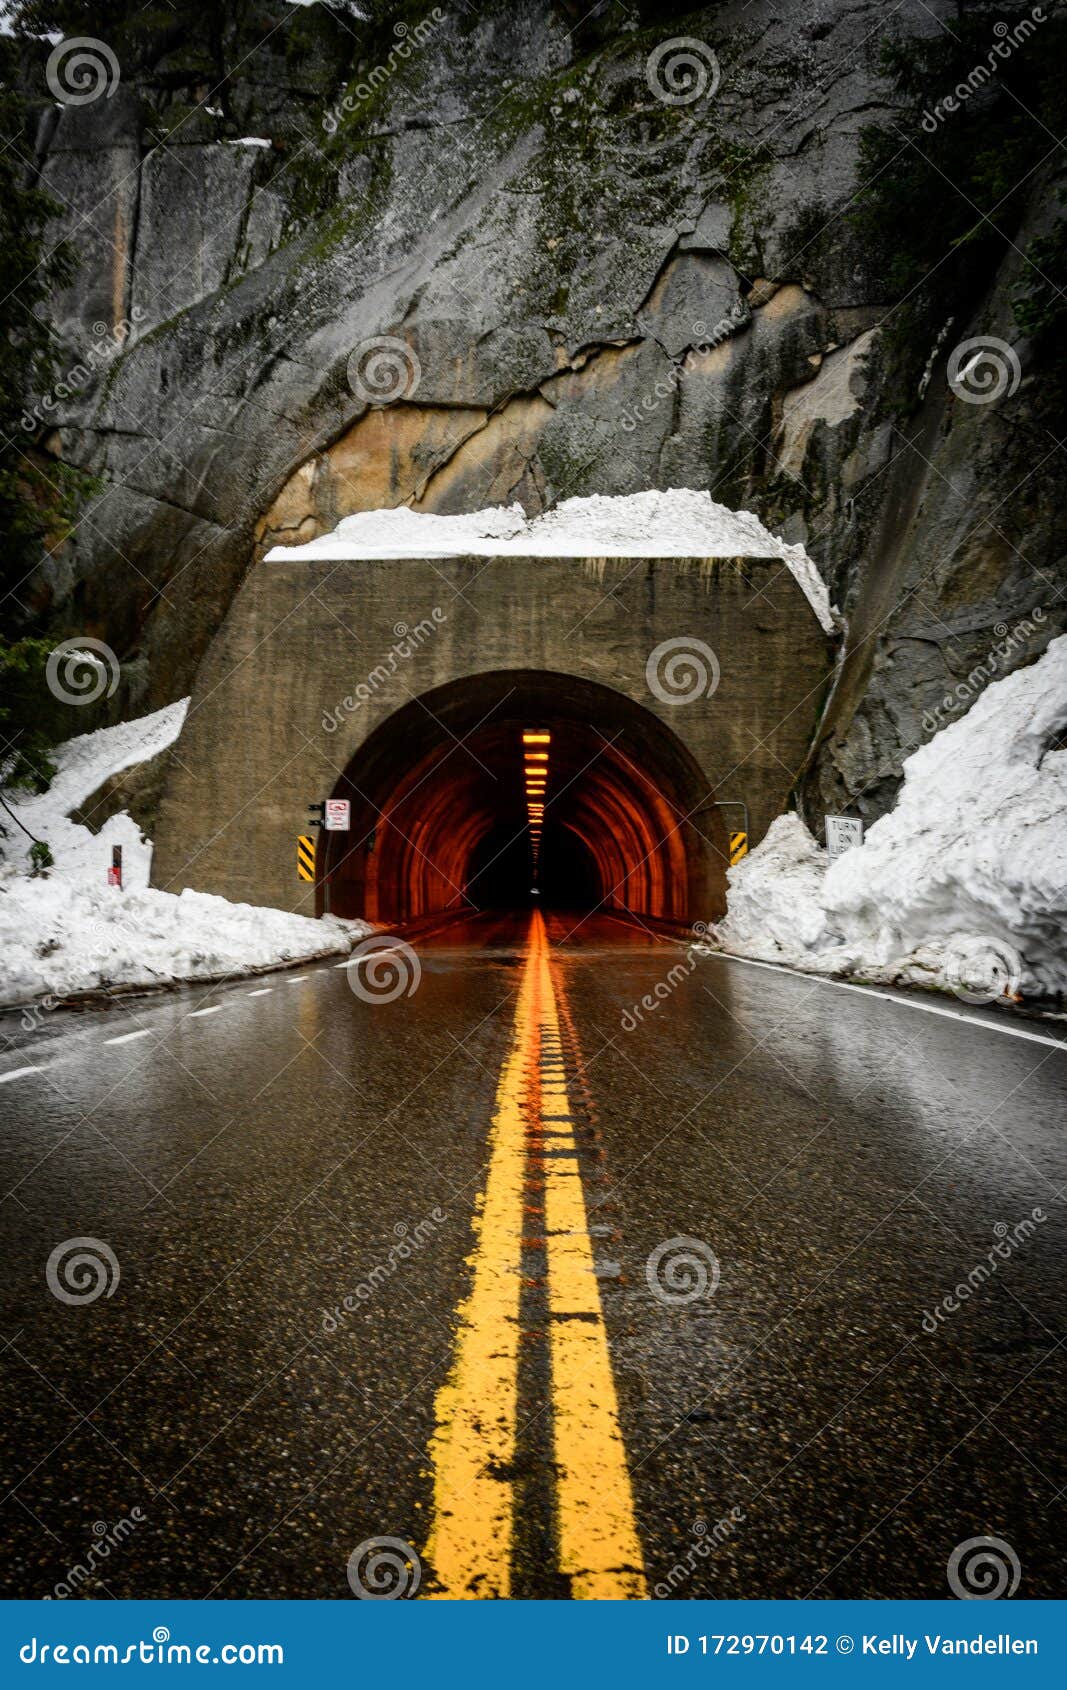 snow at the entrance of the wawona tunnel